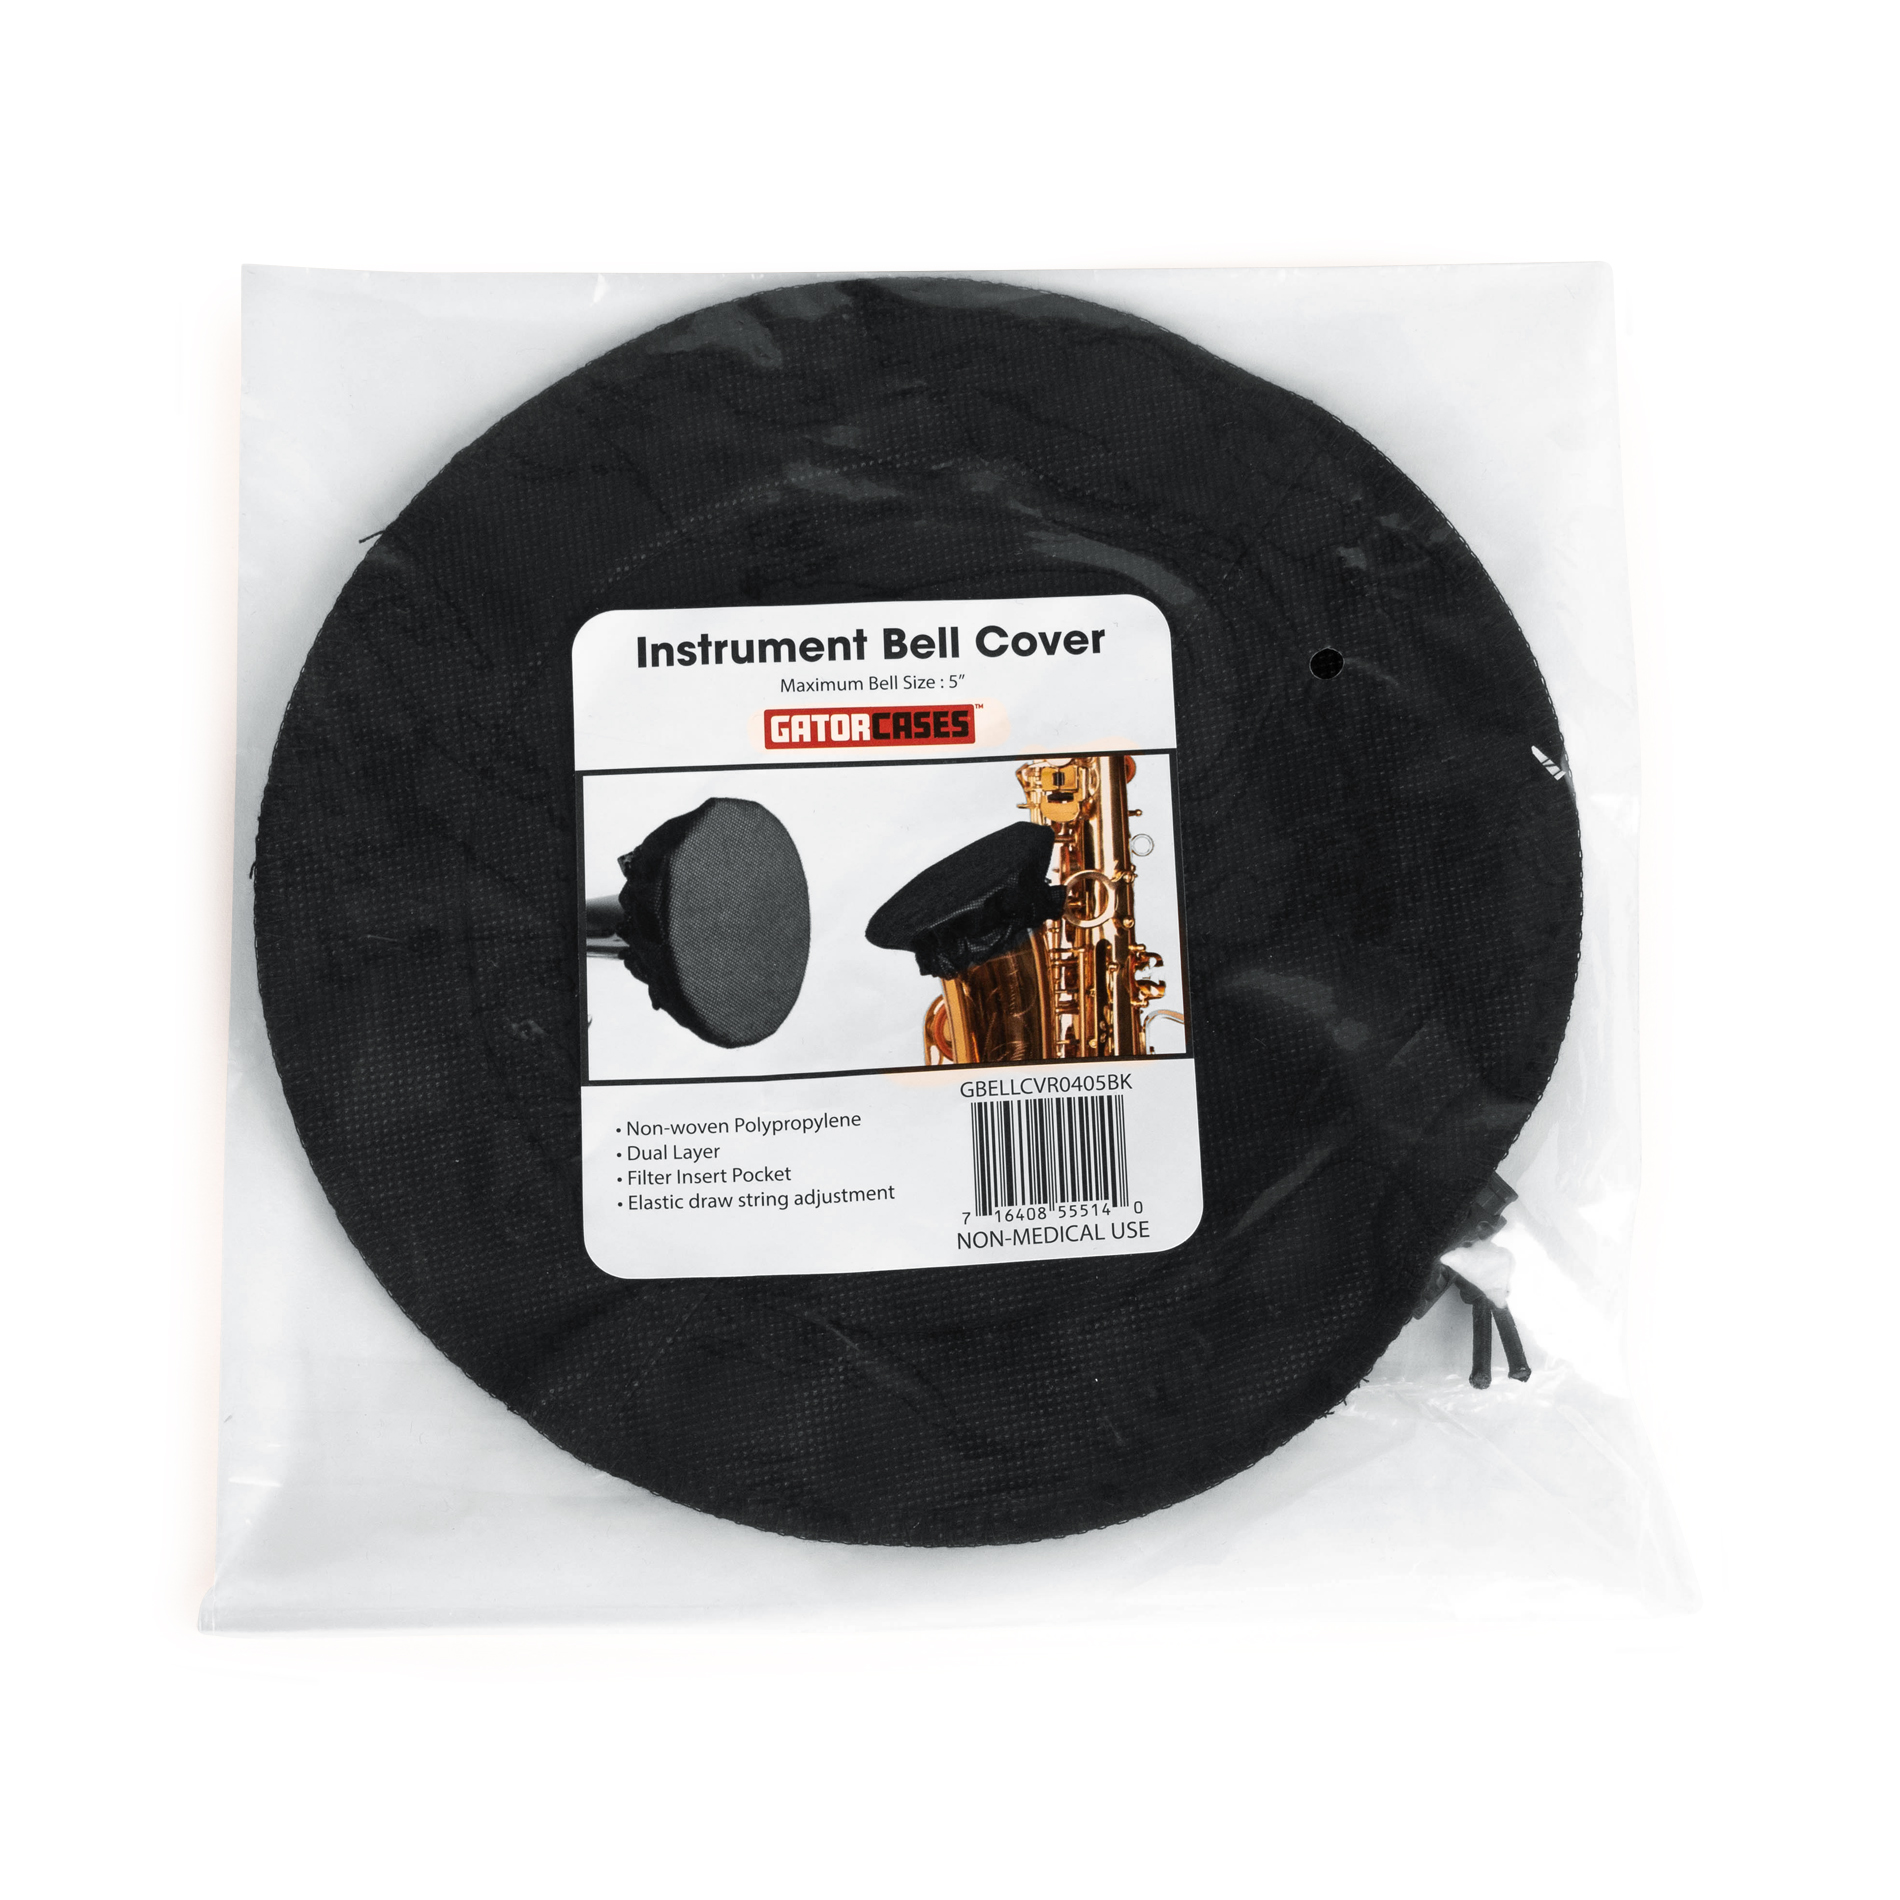 Black Bell Cover with MERV 13 filter, 8-9 Inches-GBELLCVR0809BK